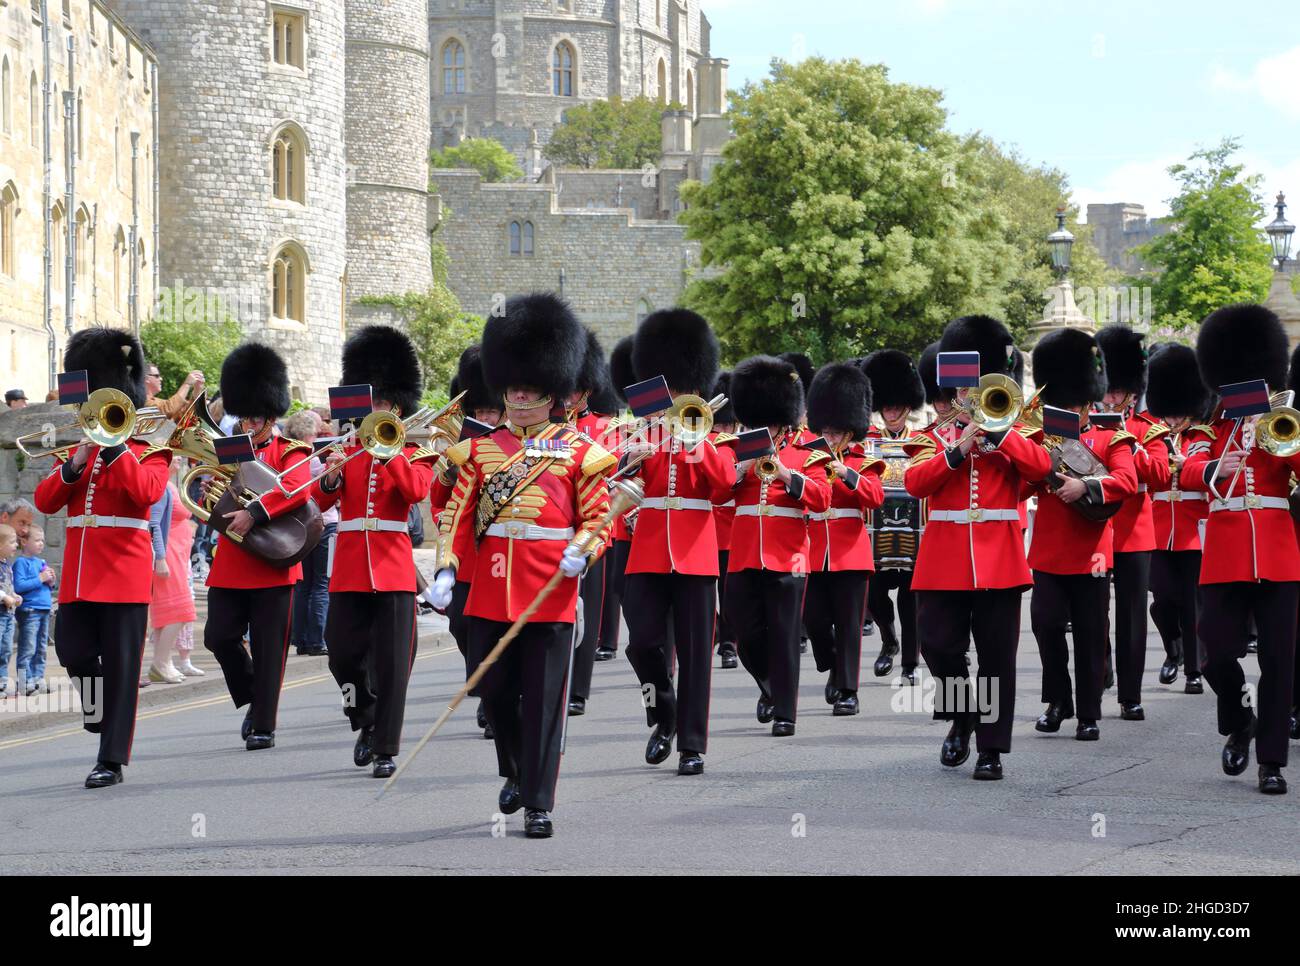 A military band marches during changing of the guards at Windsor Castle, Windsor, Berkshire, UK Stock Photo